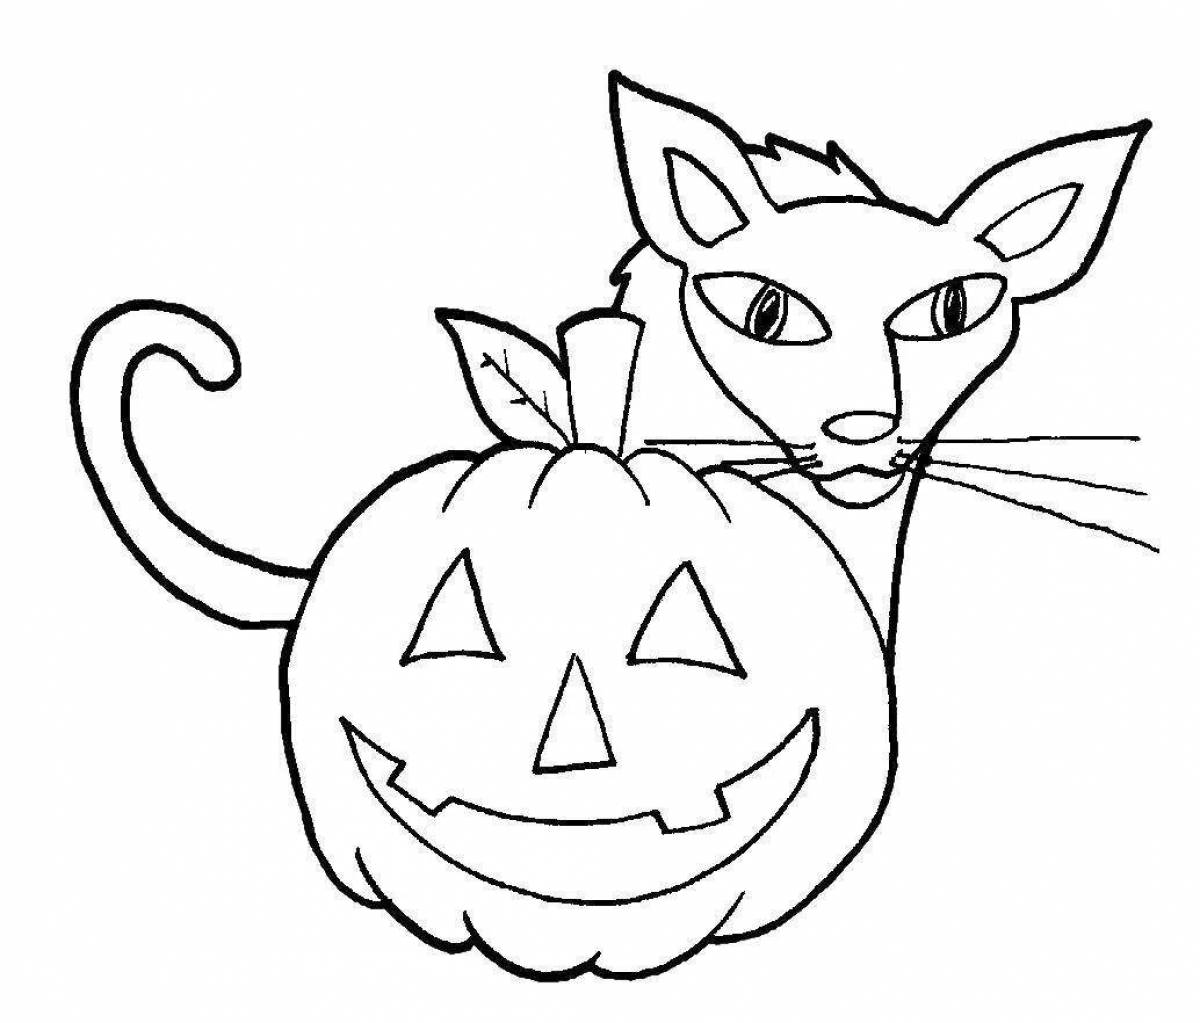 Nervous Siamese cat coloring page